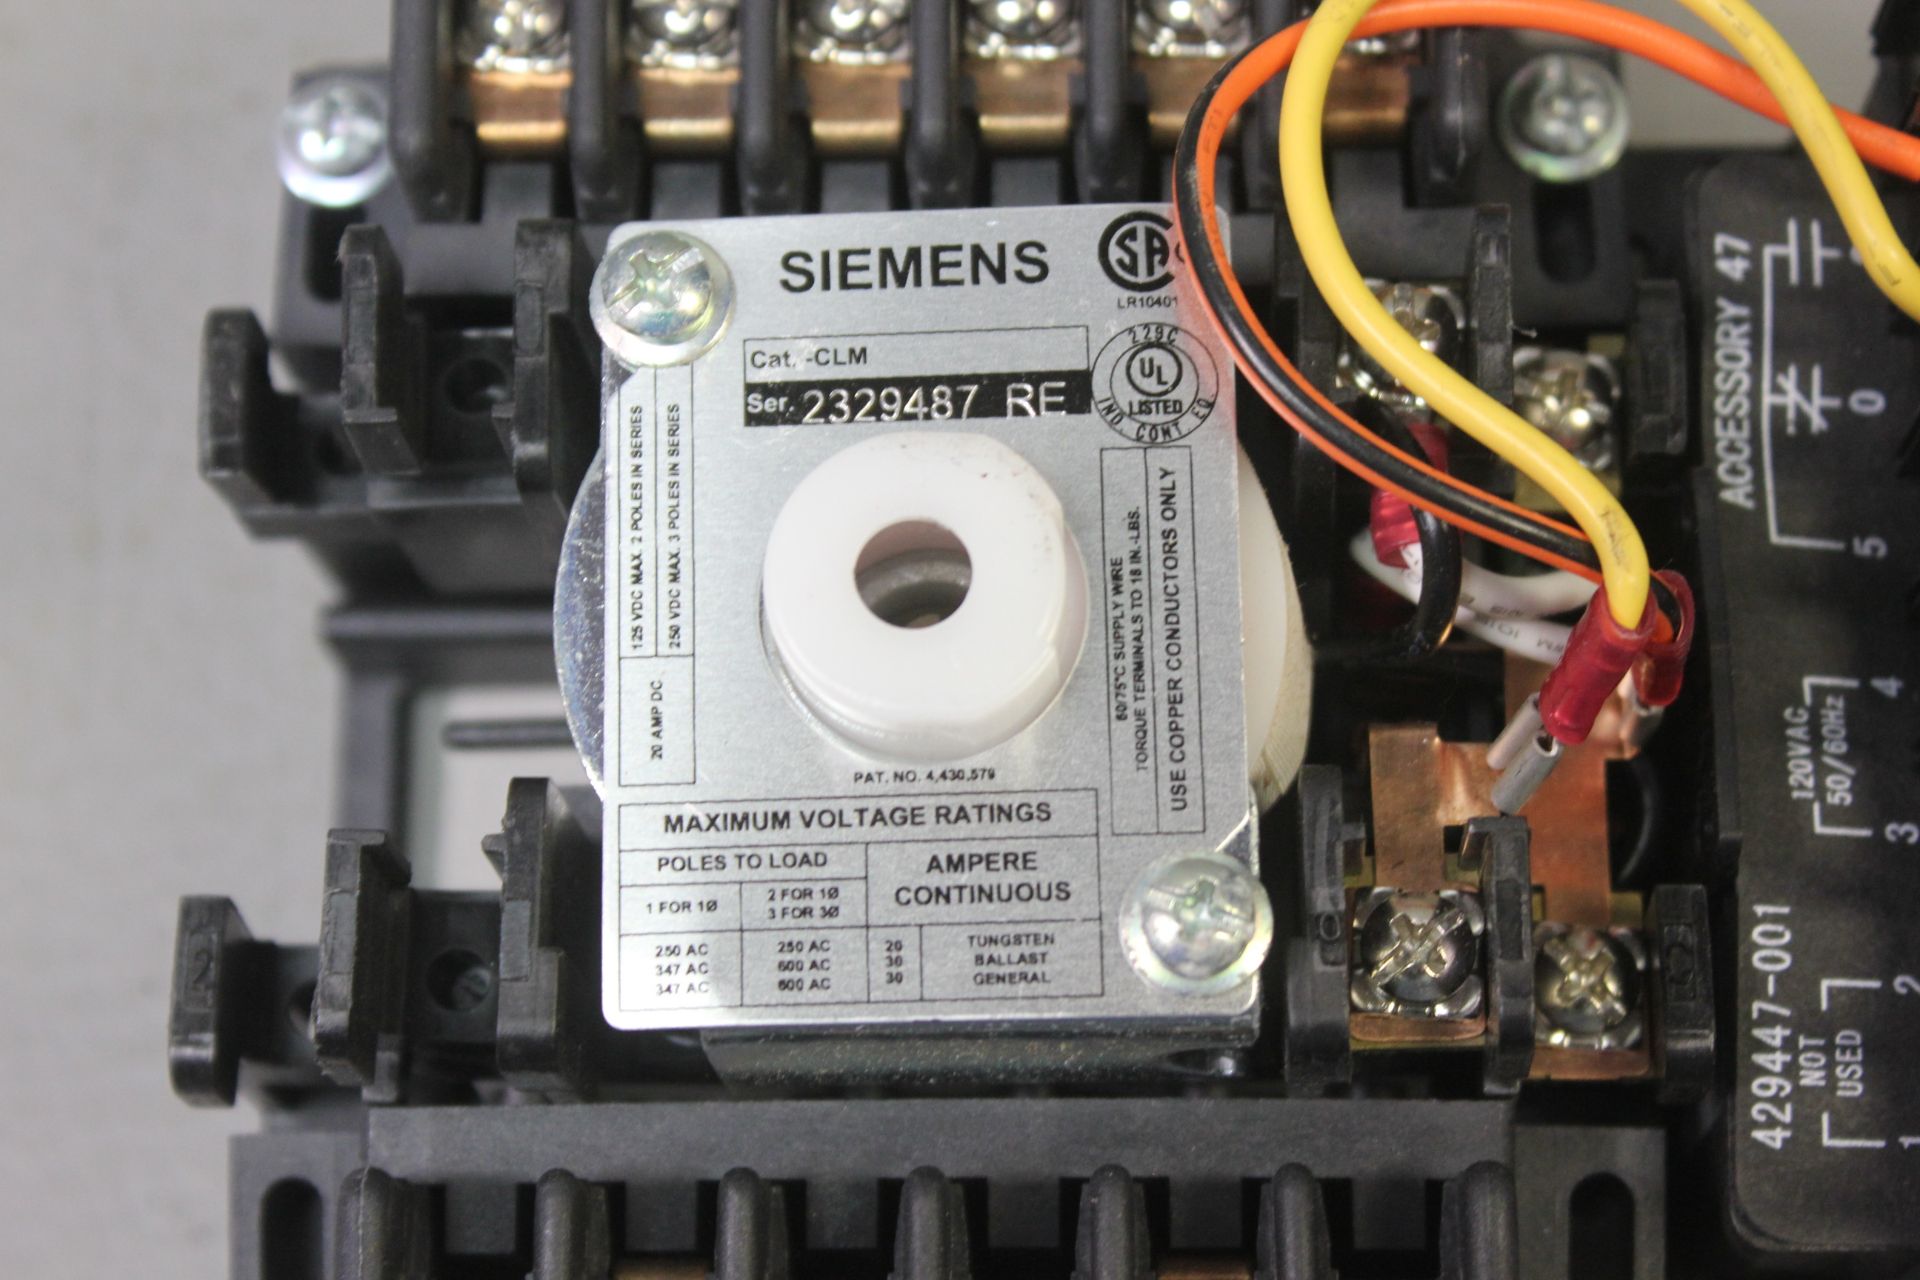 UNUSED SIEMENS CLM LIGHTING CONTACTOR WITH CONTROL MODULE - Image 3 of 4